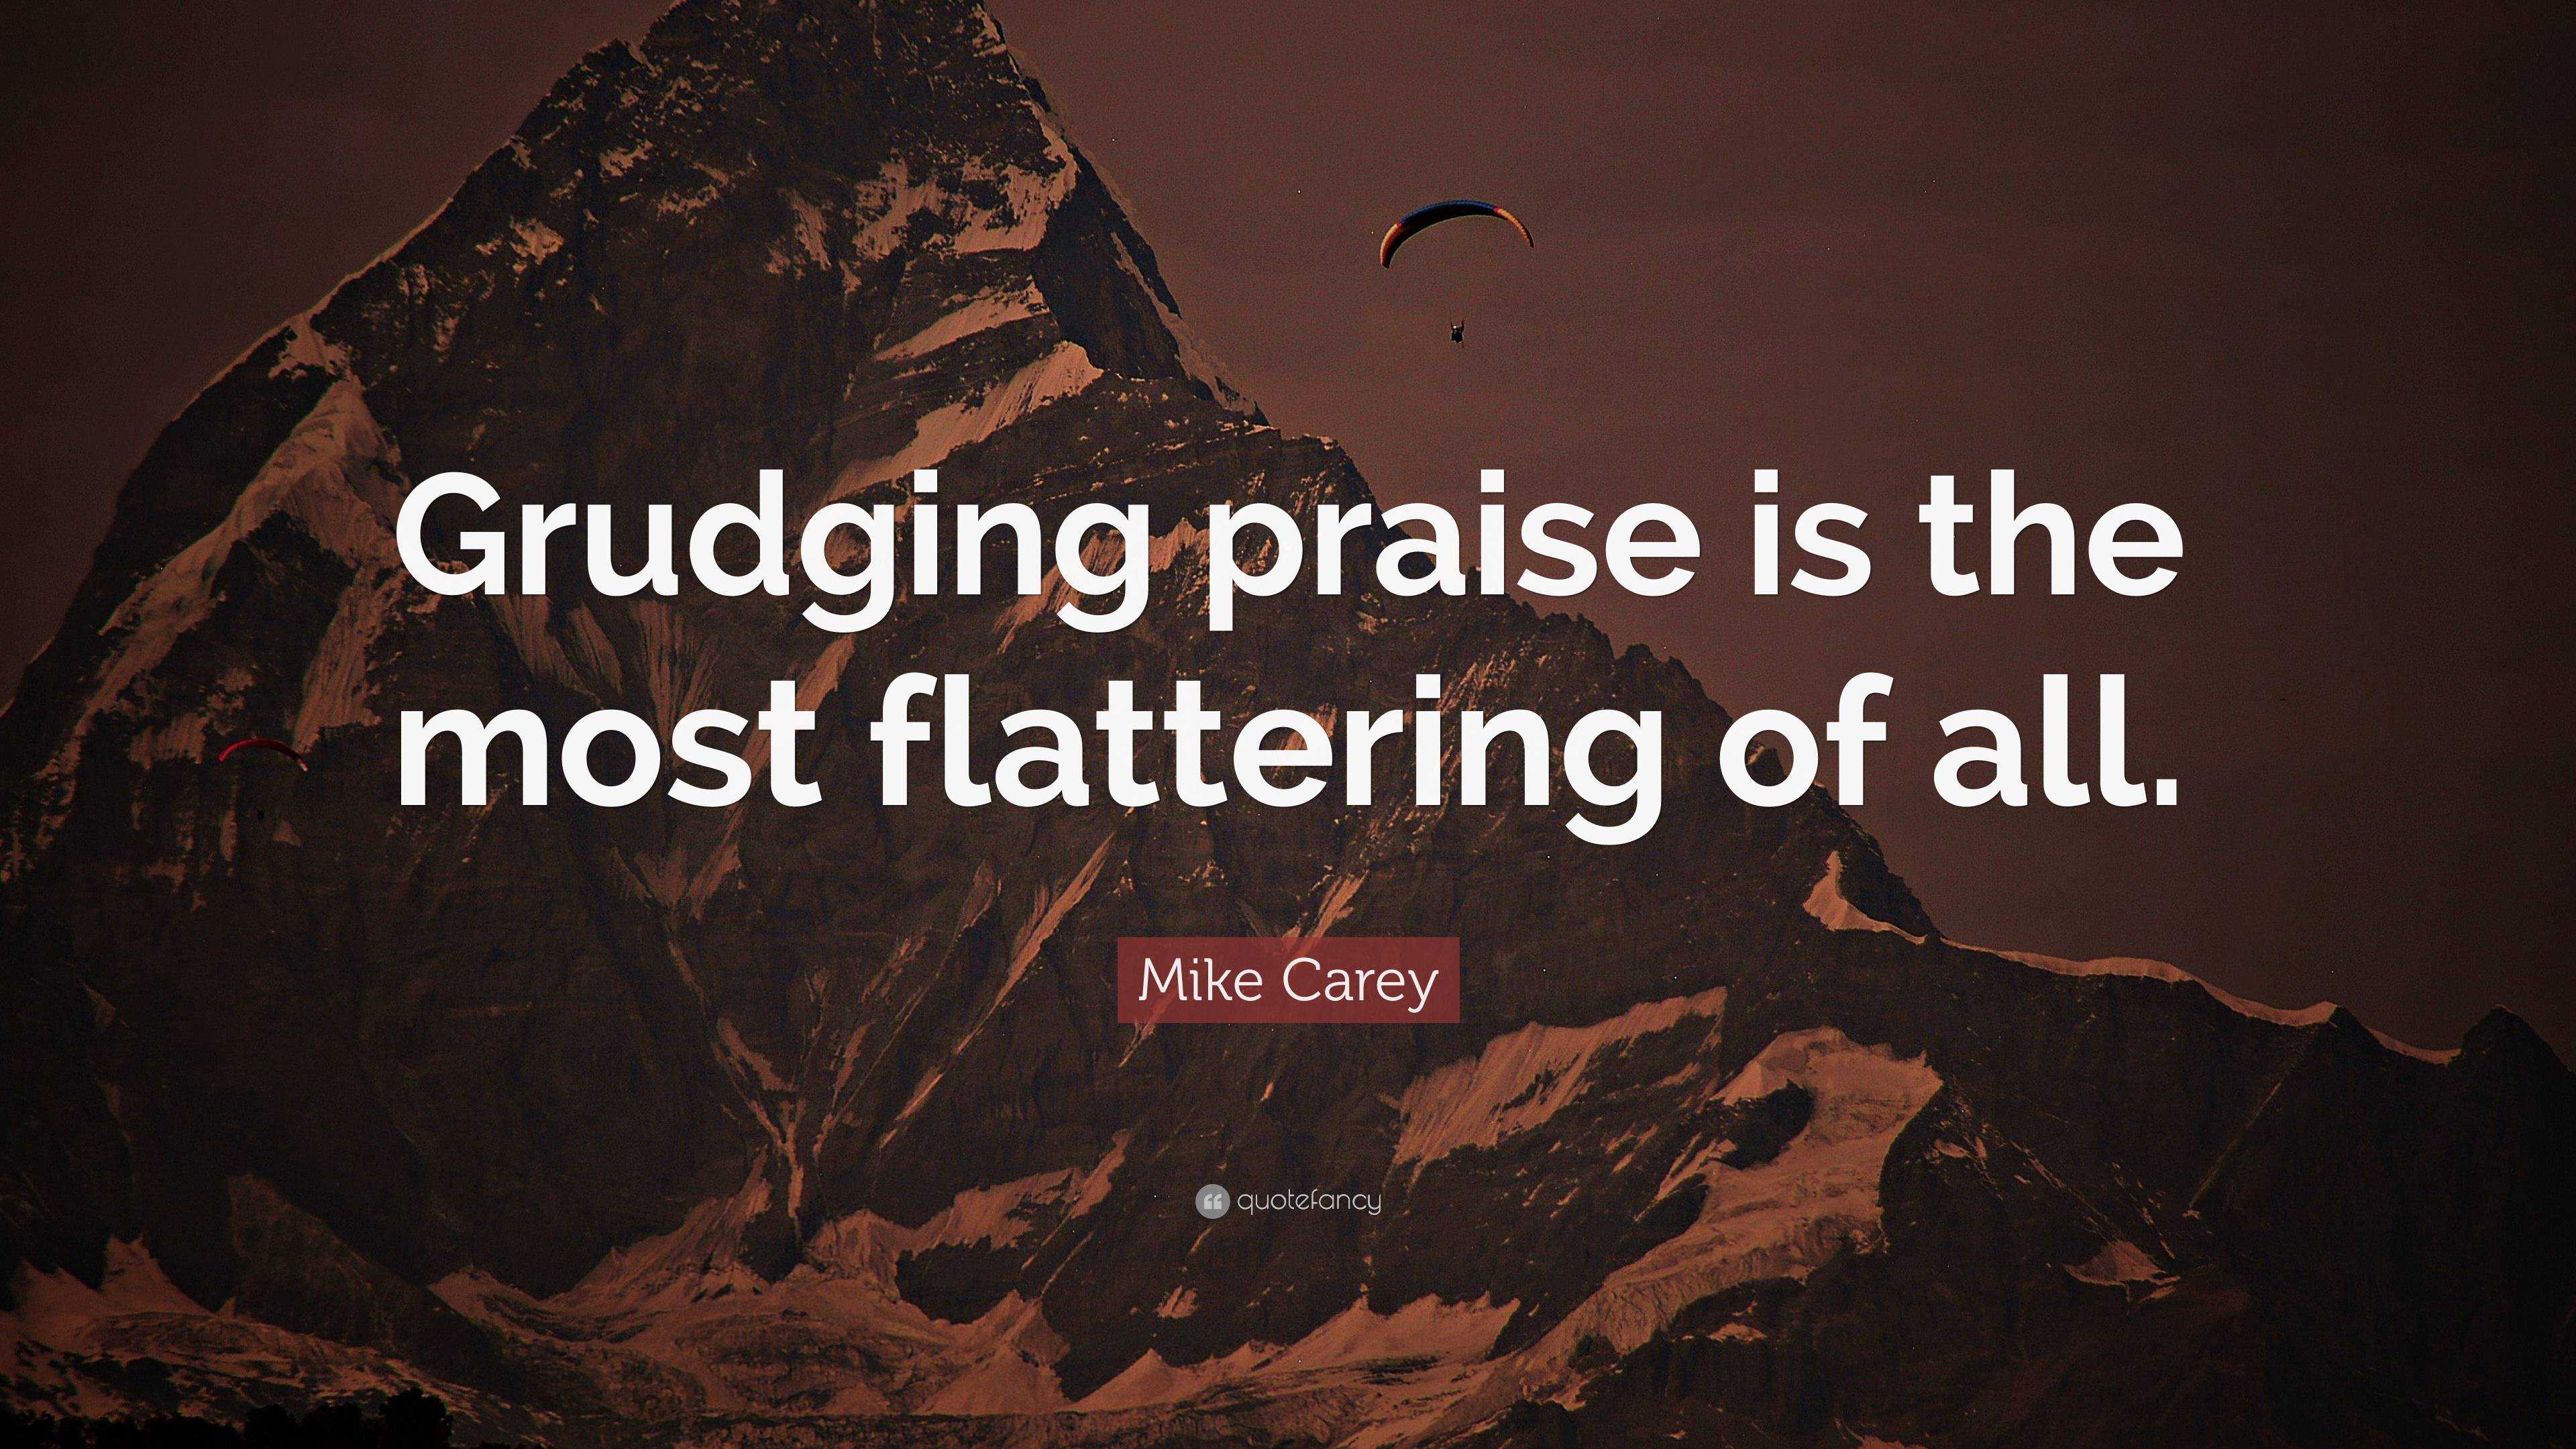 Mike Carey Quote: “Grudging praise is the most flattering of all.”